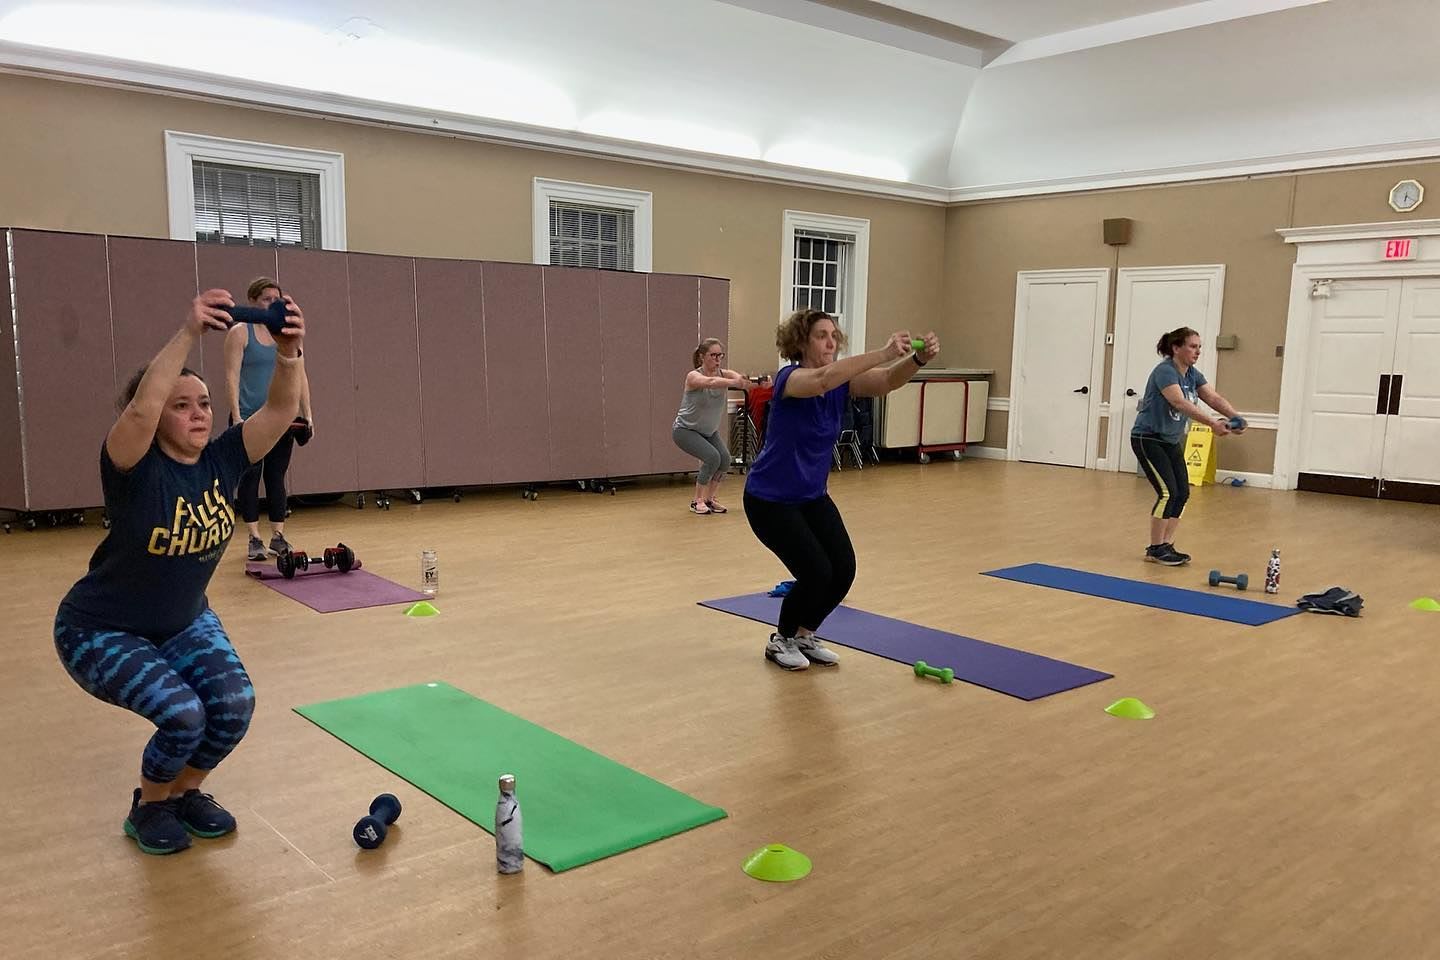 Balanced Female Fitness - The Falls Church: Read Reviews and Book Classes  on ClassPass